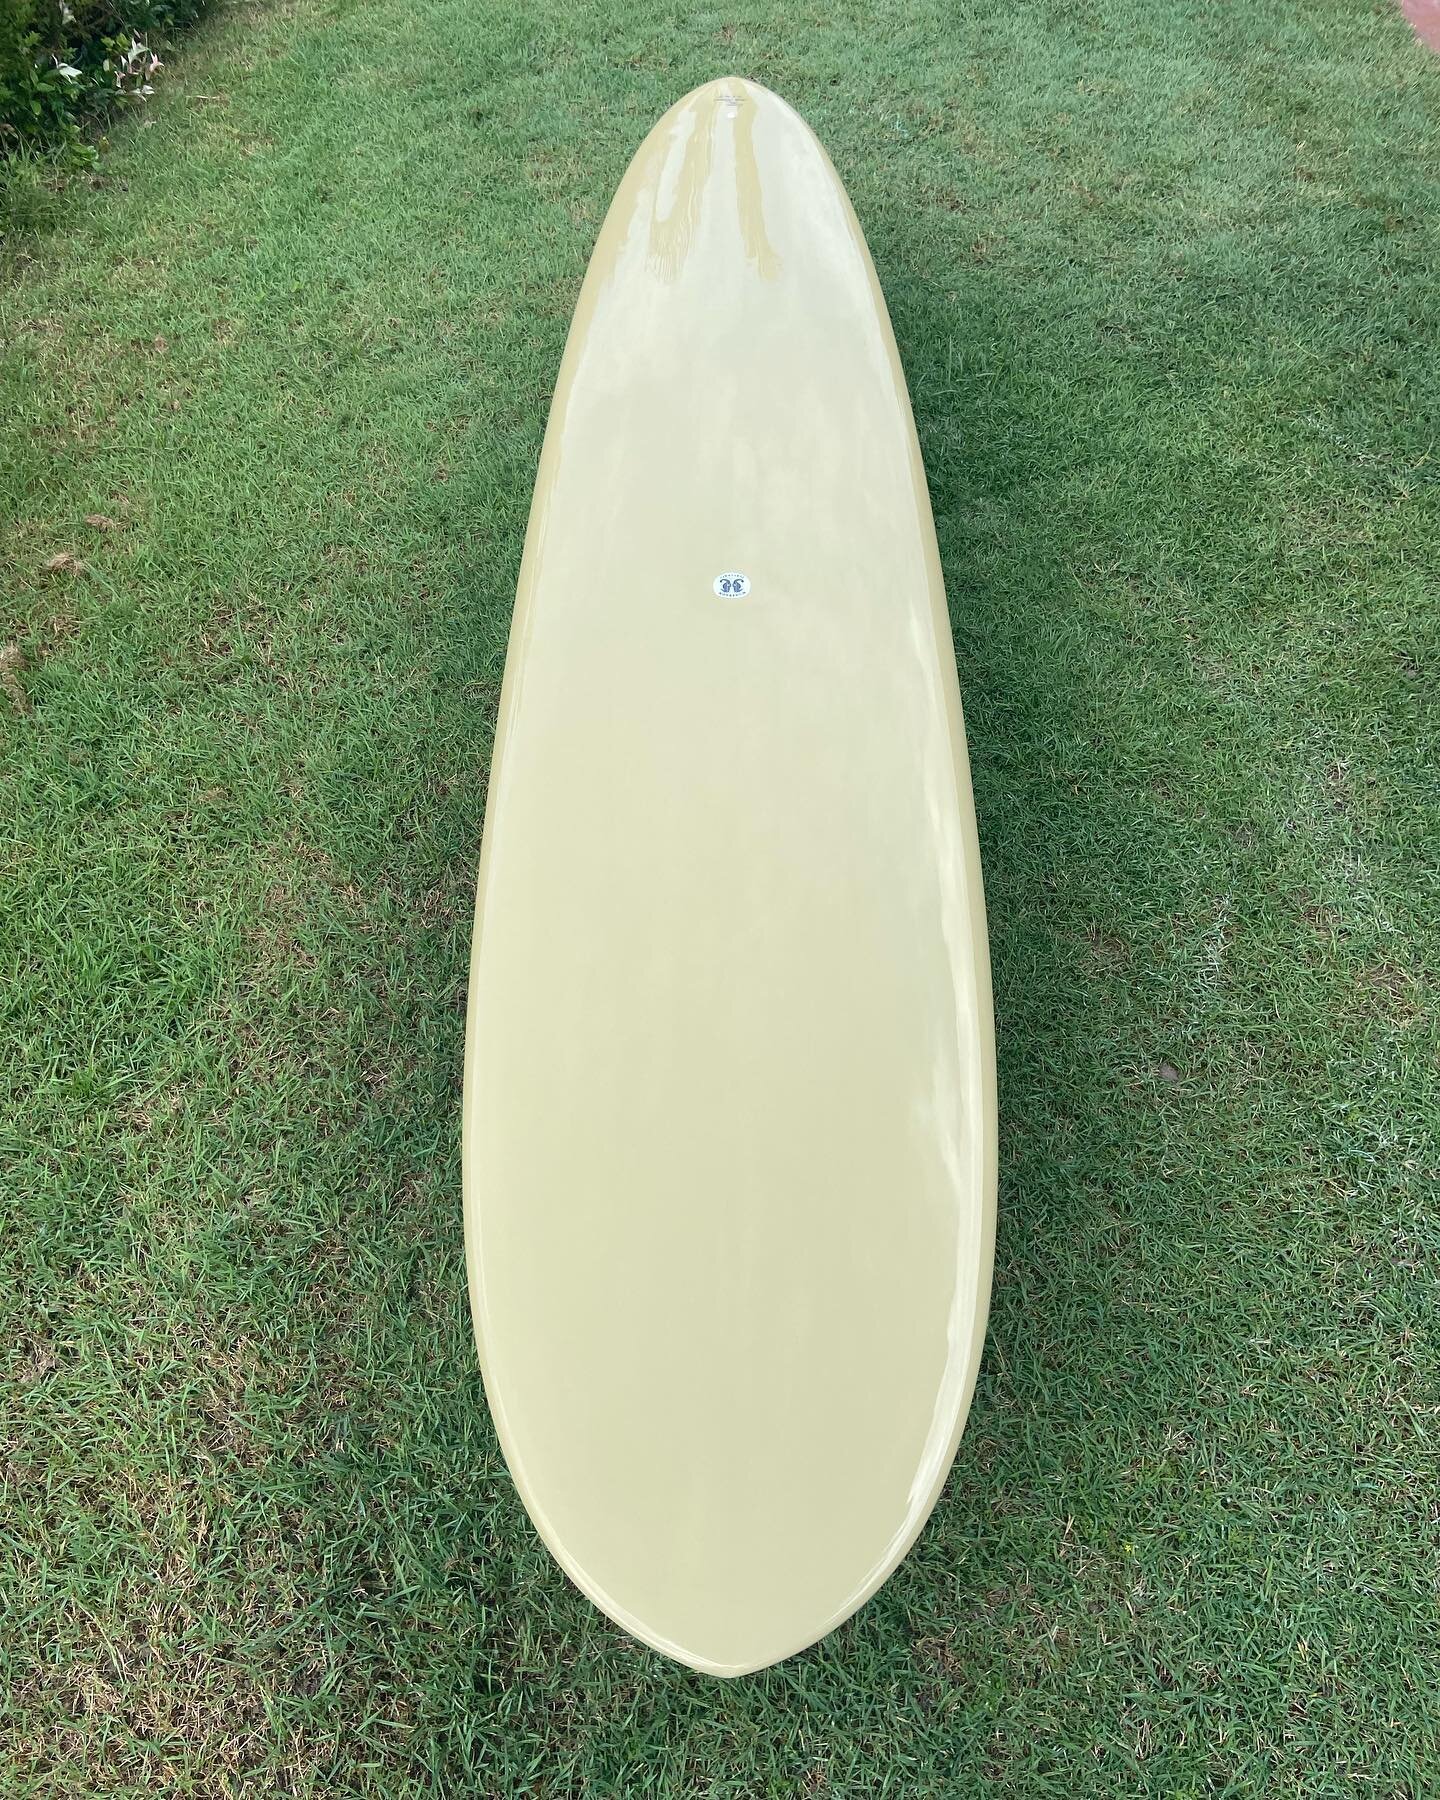 9&rsquo;4&rdquo; &bull;NRM&bull; #custom for @mike_brown_777 , the NRM is a rounded pin tail nose rider with a slightly deeper nose concave, balanced rocker and refined medium 50/50 rail, glassed in opaque khaki deck and lilac tint bottom single fin 